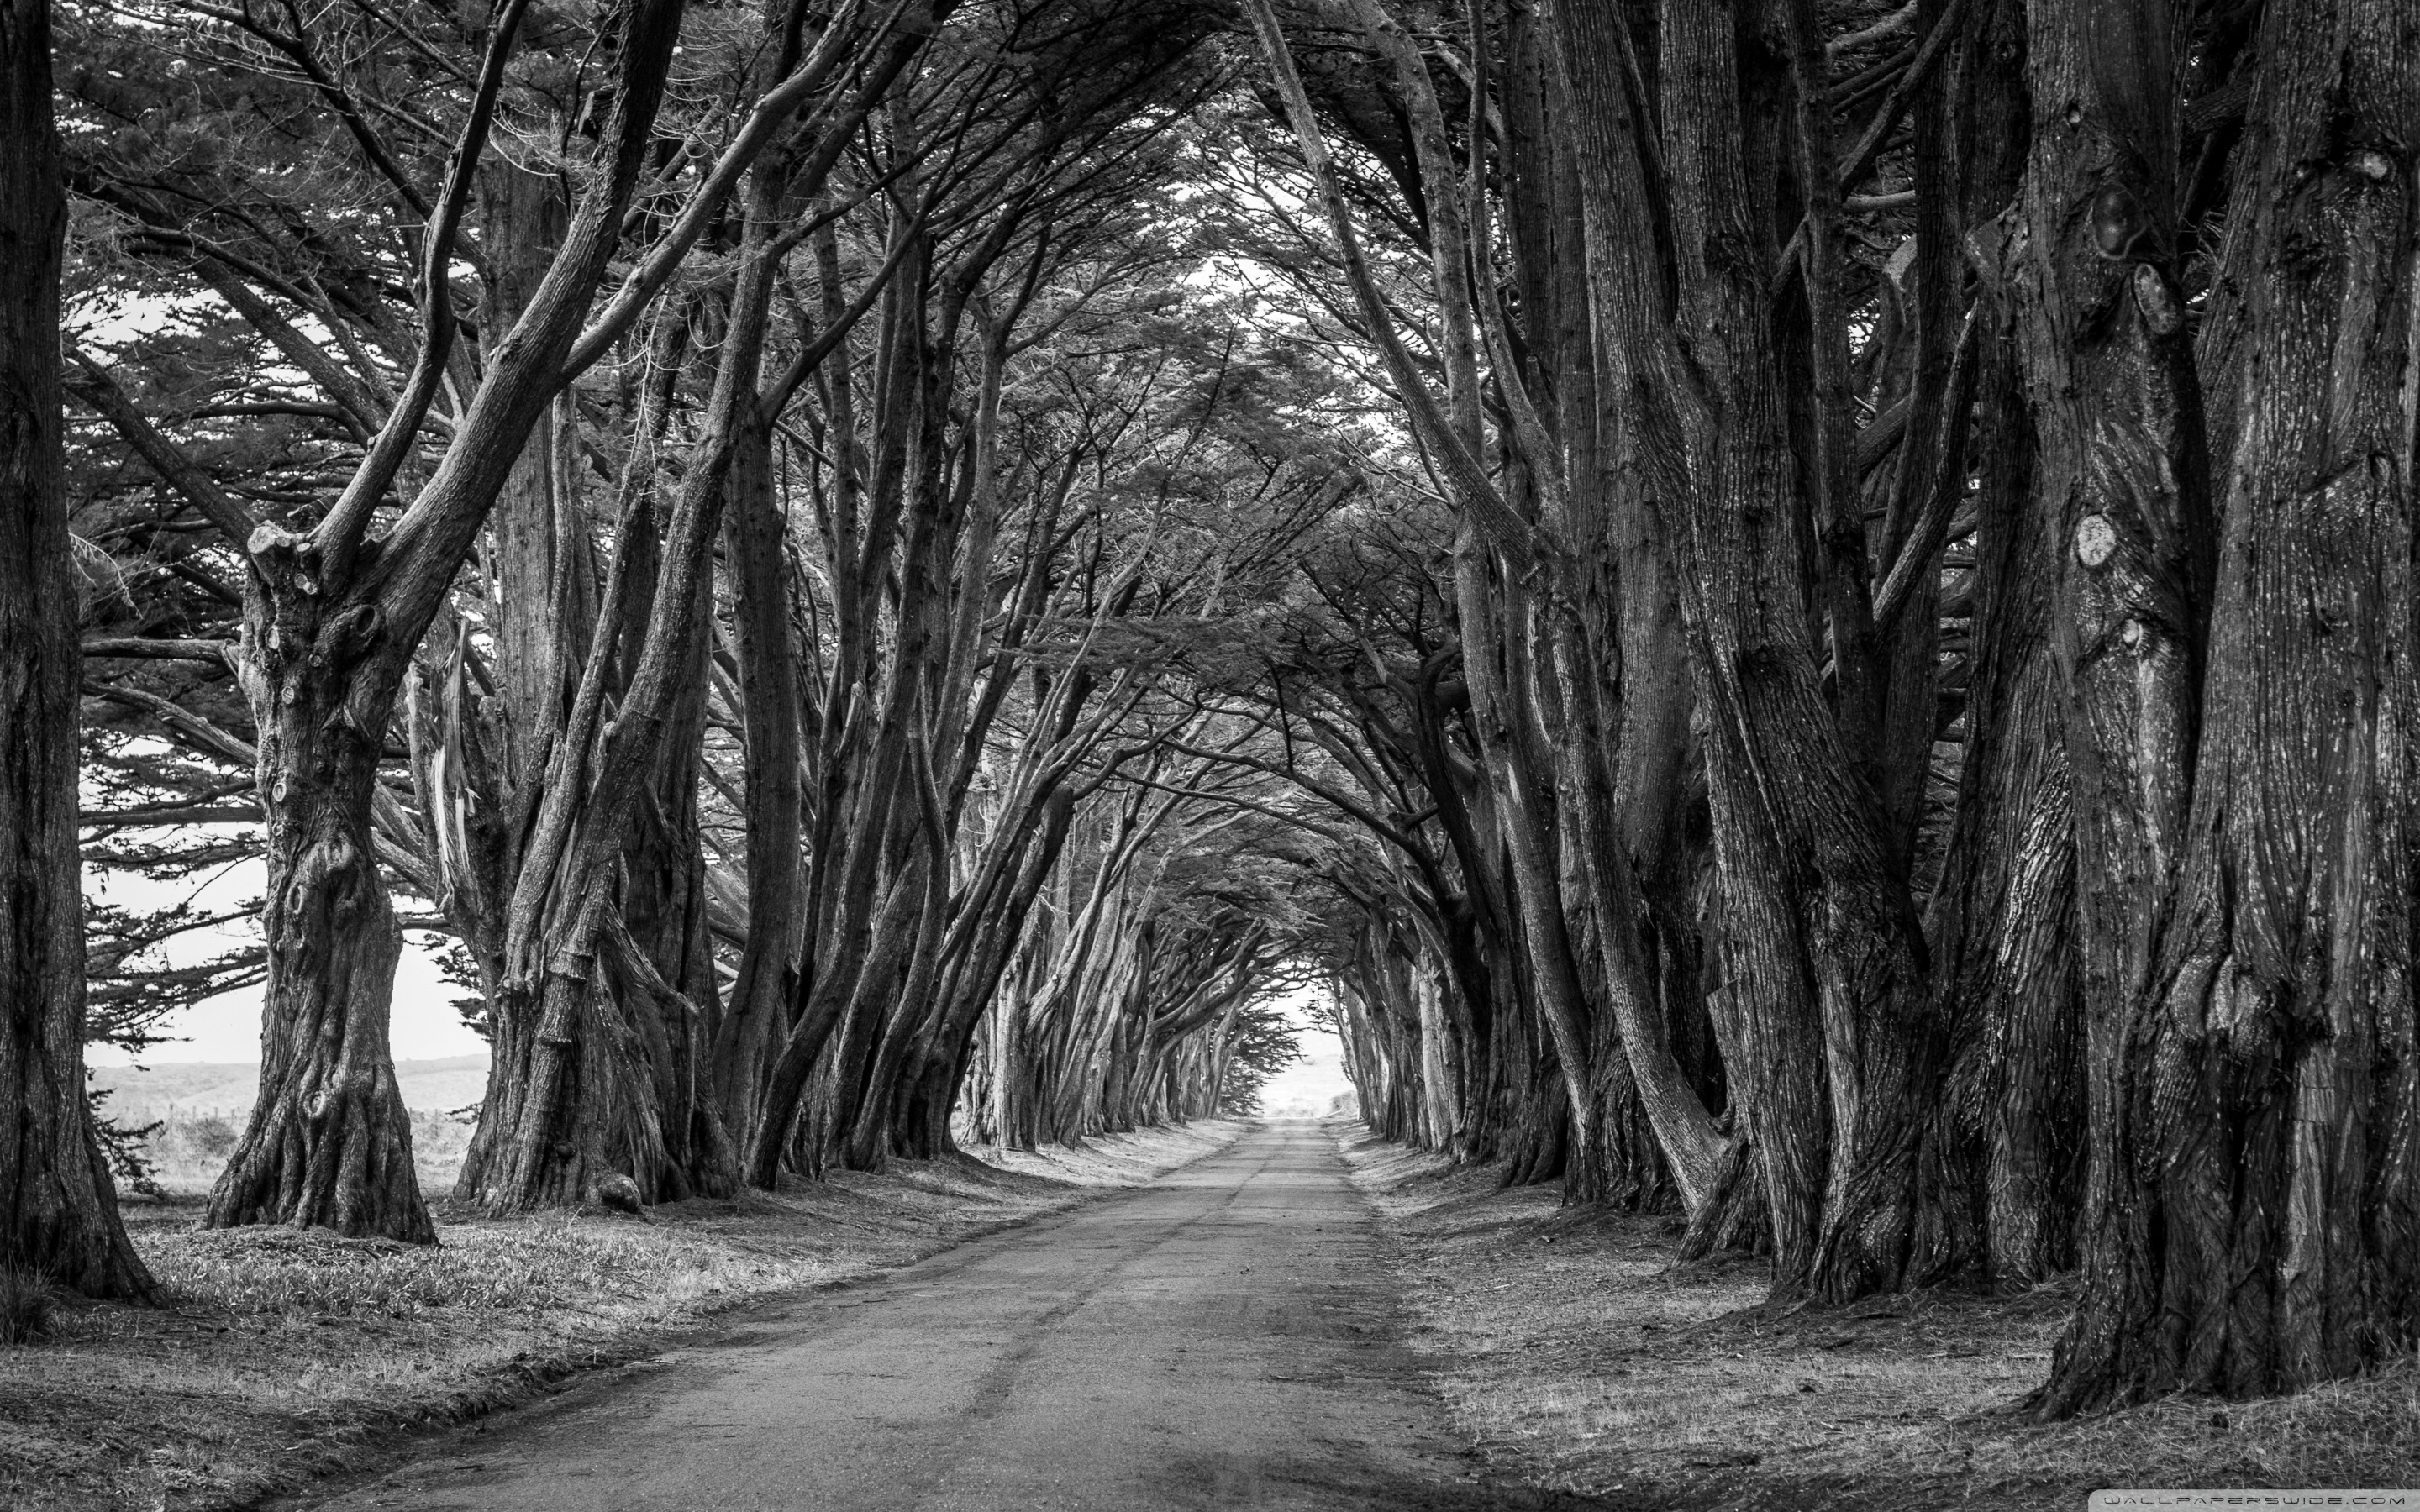 Country Road, Aligned Trees, Black and White Ultra HD Desktop Background  Wallpaper for 4K UHD TV : Widescreen & UltraWide Desktop & Laptop : Multi  Display, Dual Monitor : Tablet : Smartphone